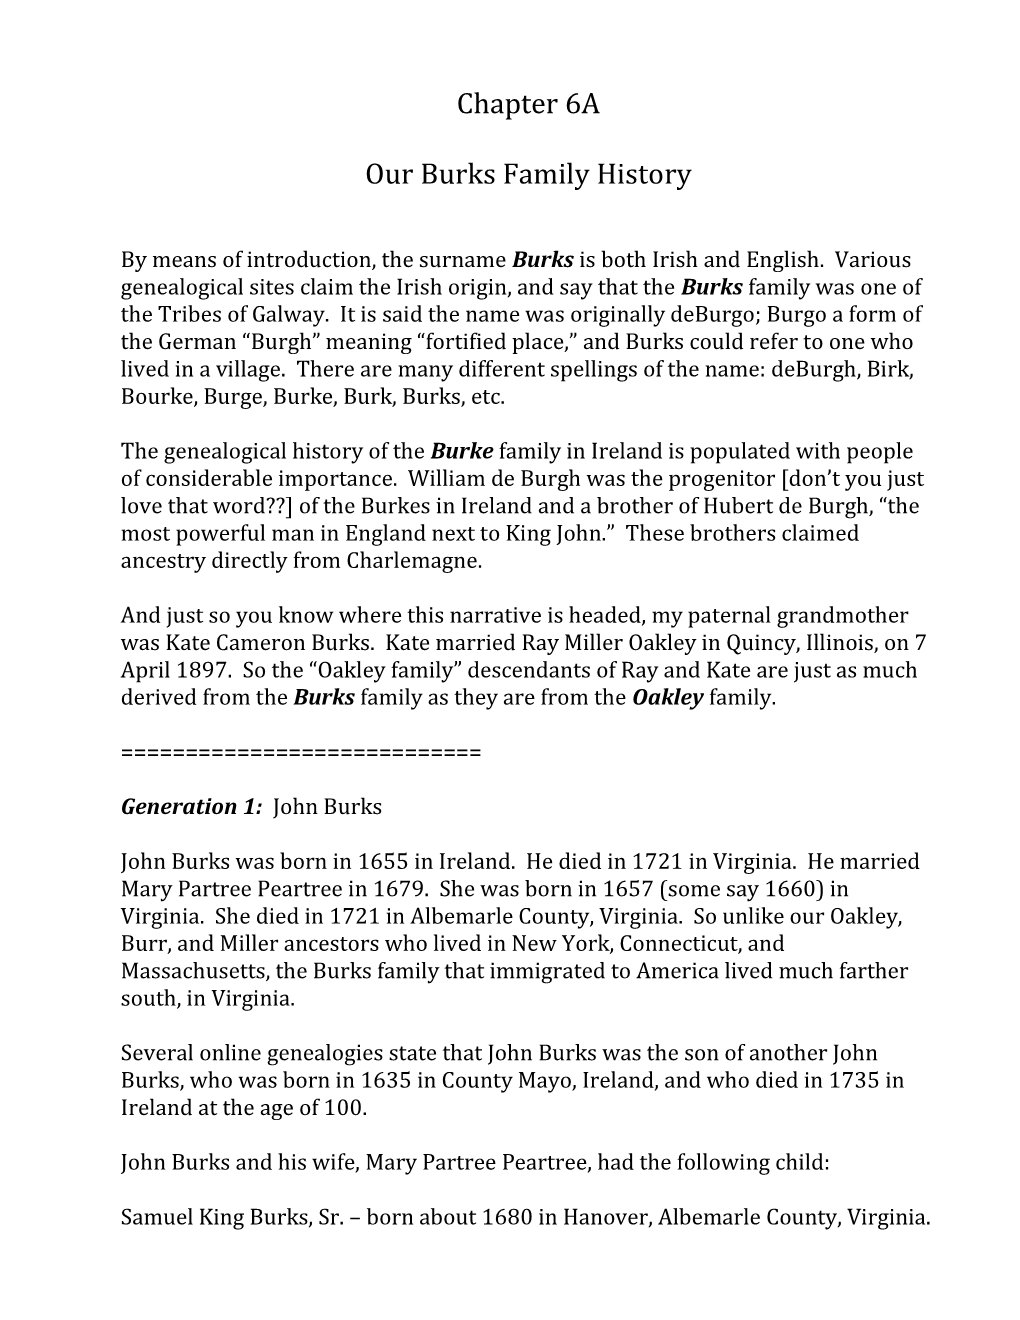 Chapter 6A Our Burks Family History